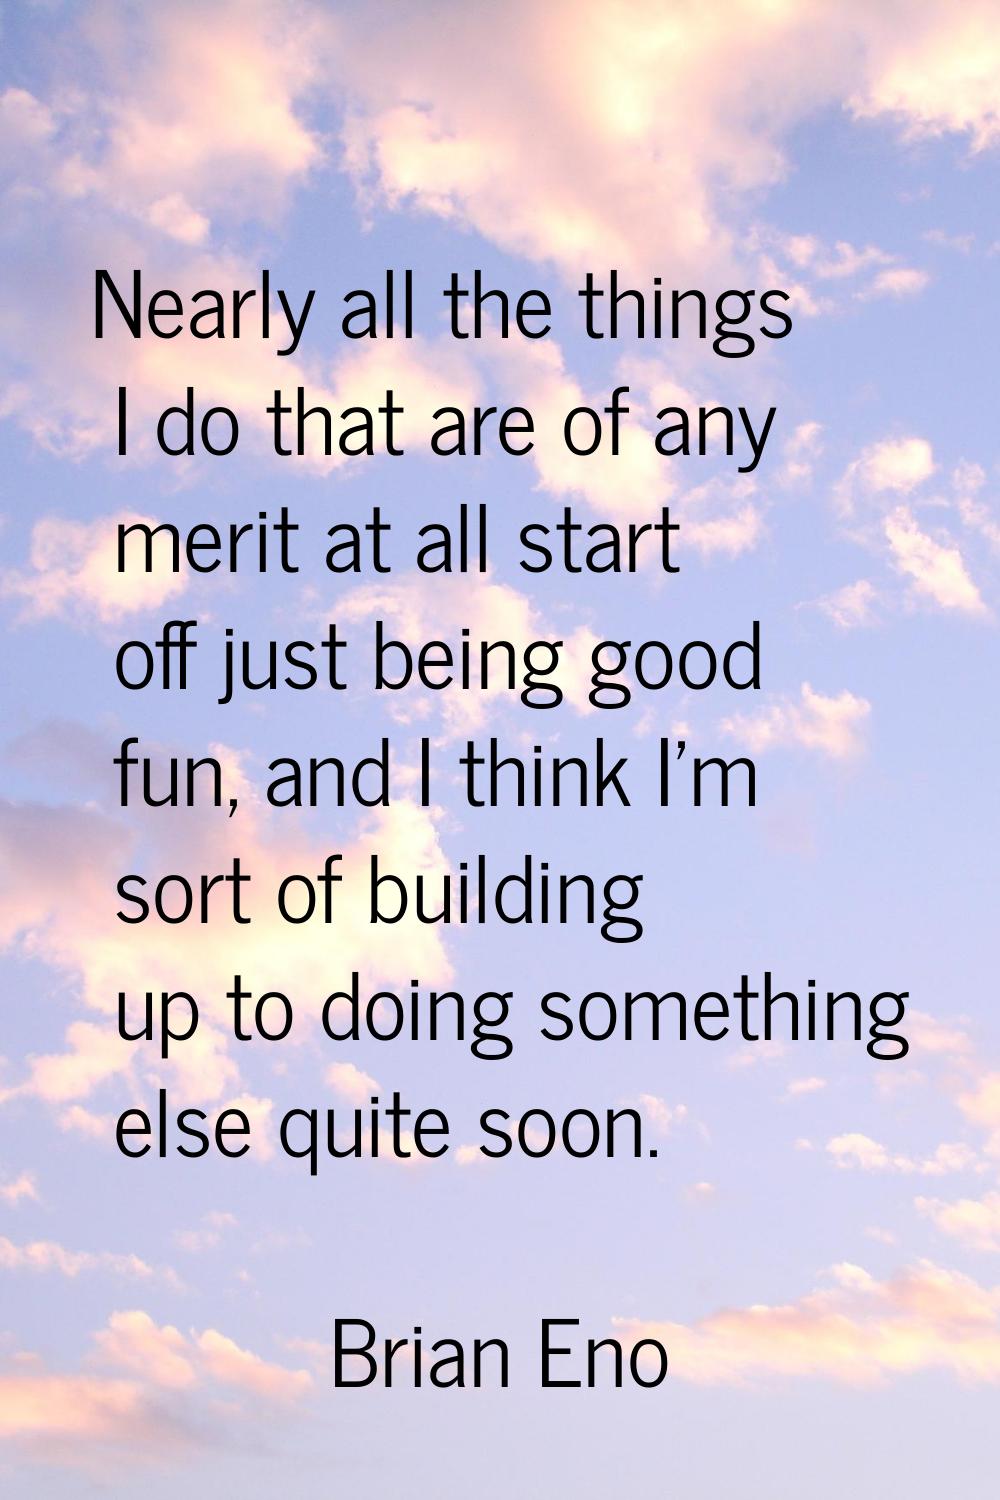 Nearly all the things I do that are of any merit at all start off just being good fun, and I think 